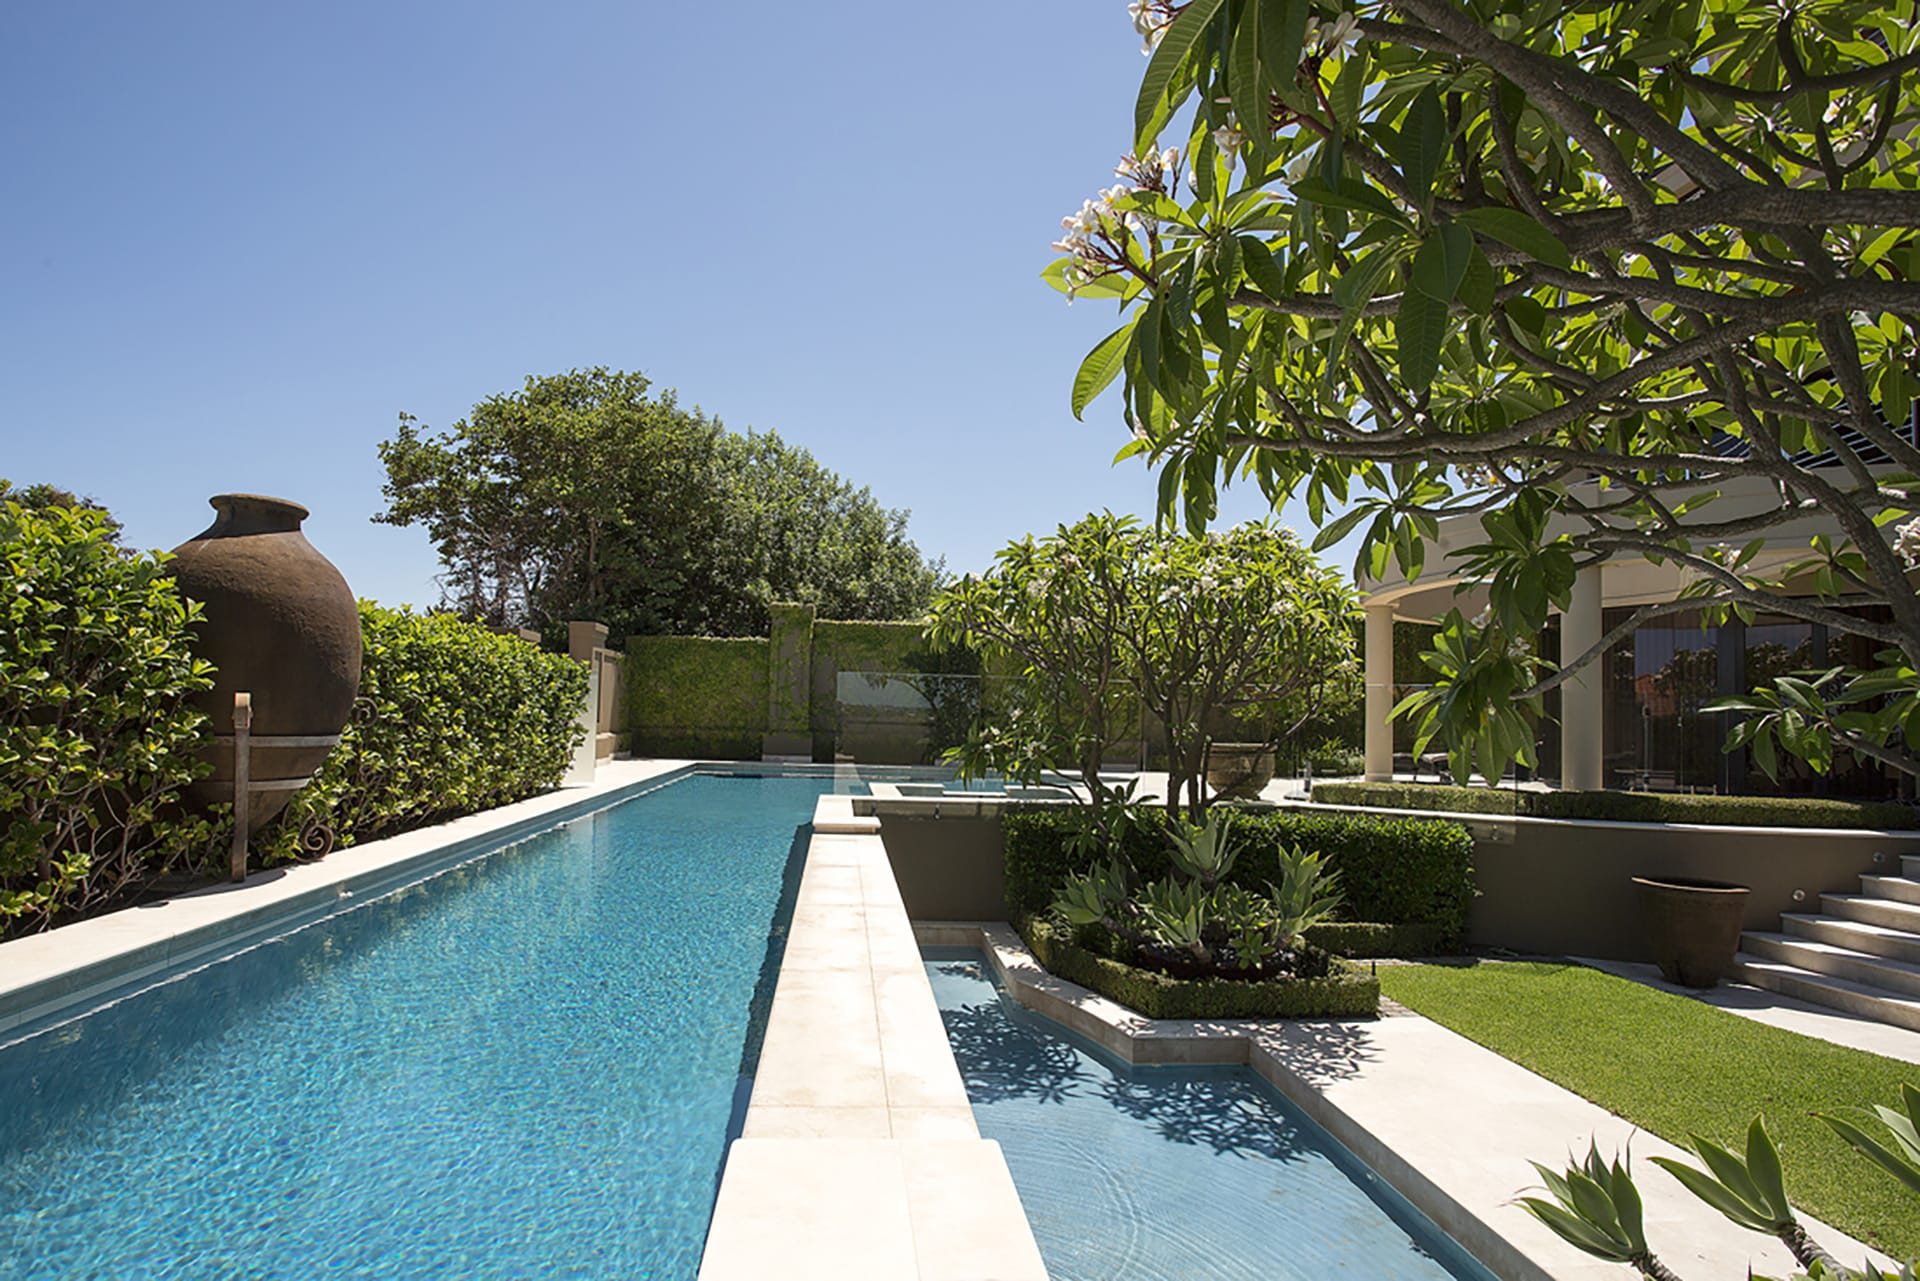 a multi-tiered mediterranean style pool